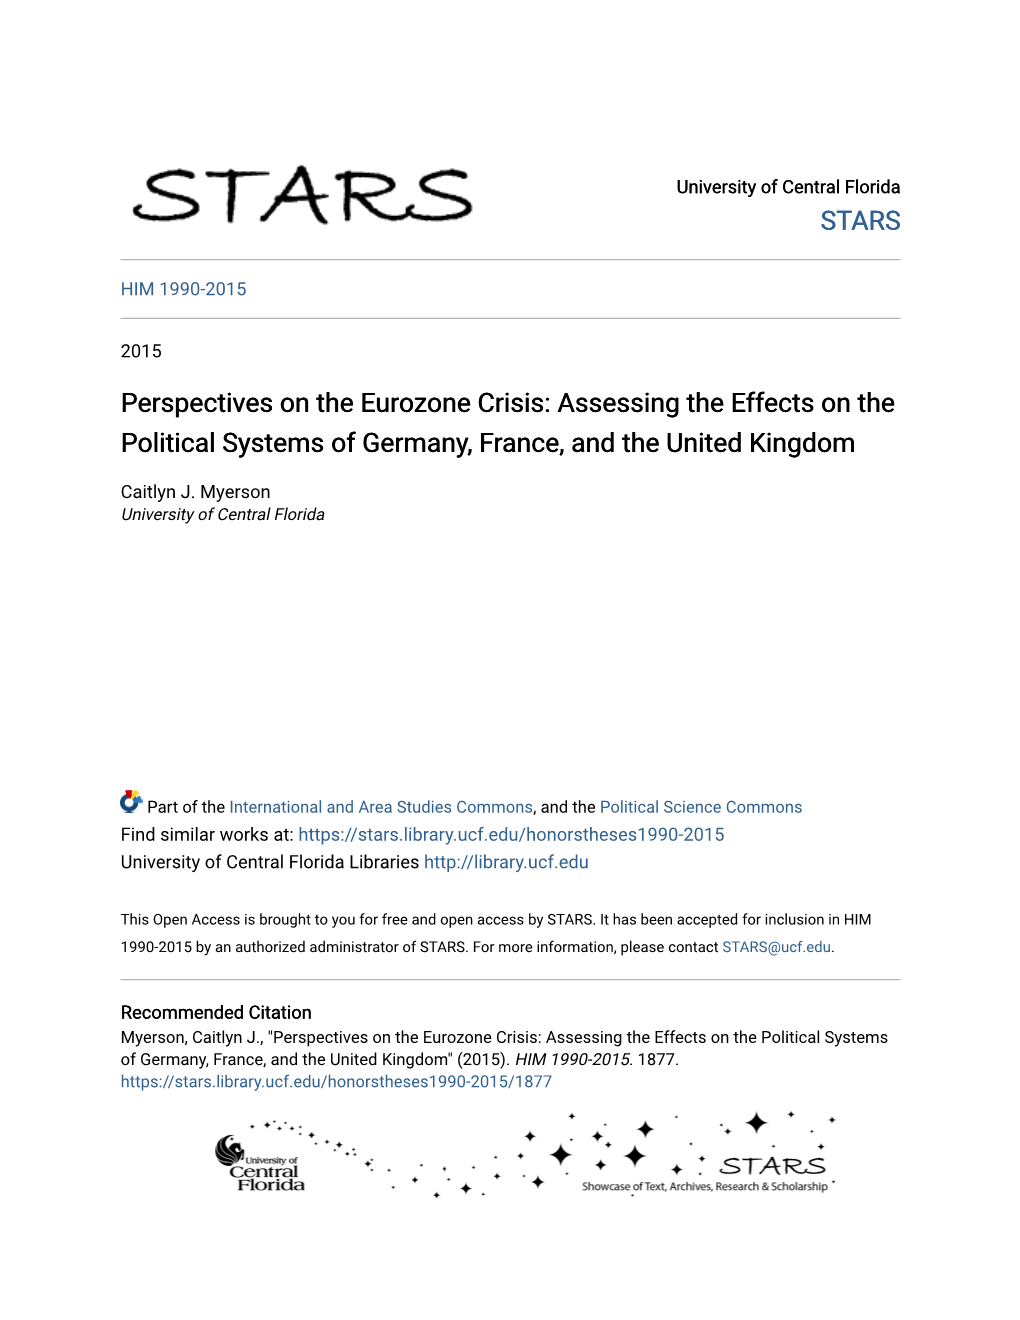 Perspectives on the Eurozone Crisis: Assessing the Effects on the Political Systems of Germany, France, and the United Kingdom